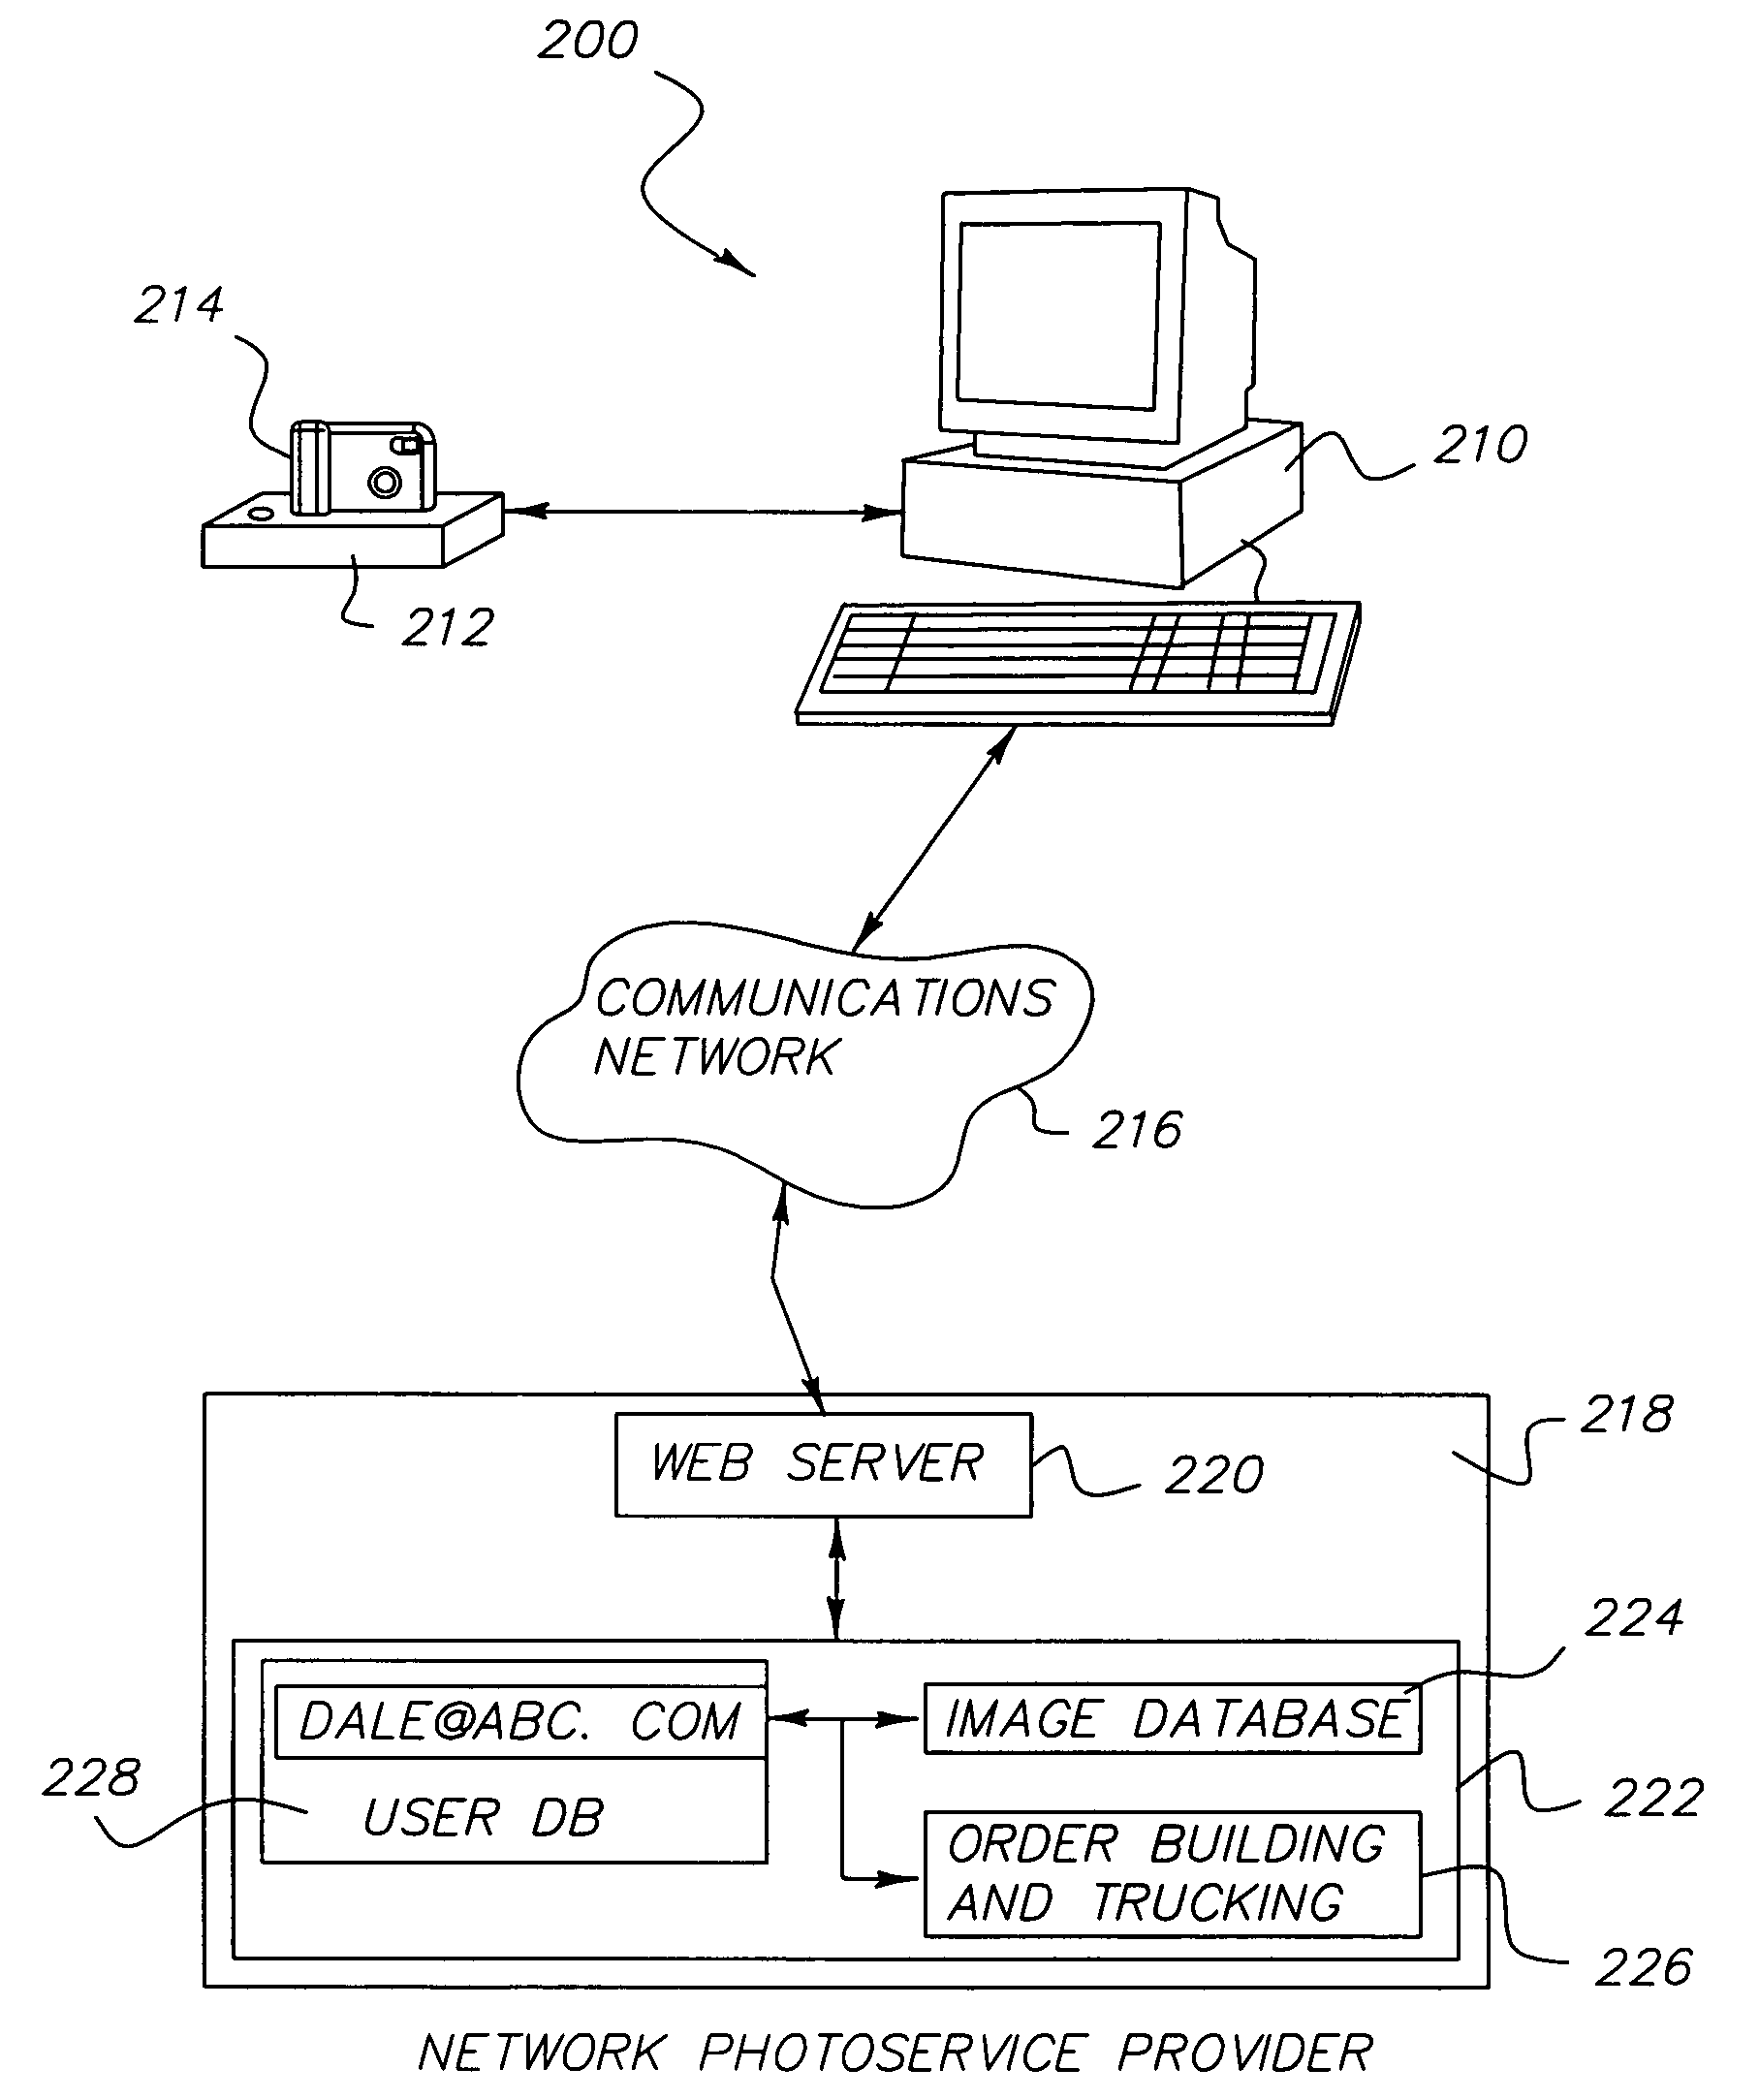 Method software program for creating an image product having predefined criteria